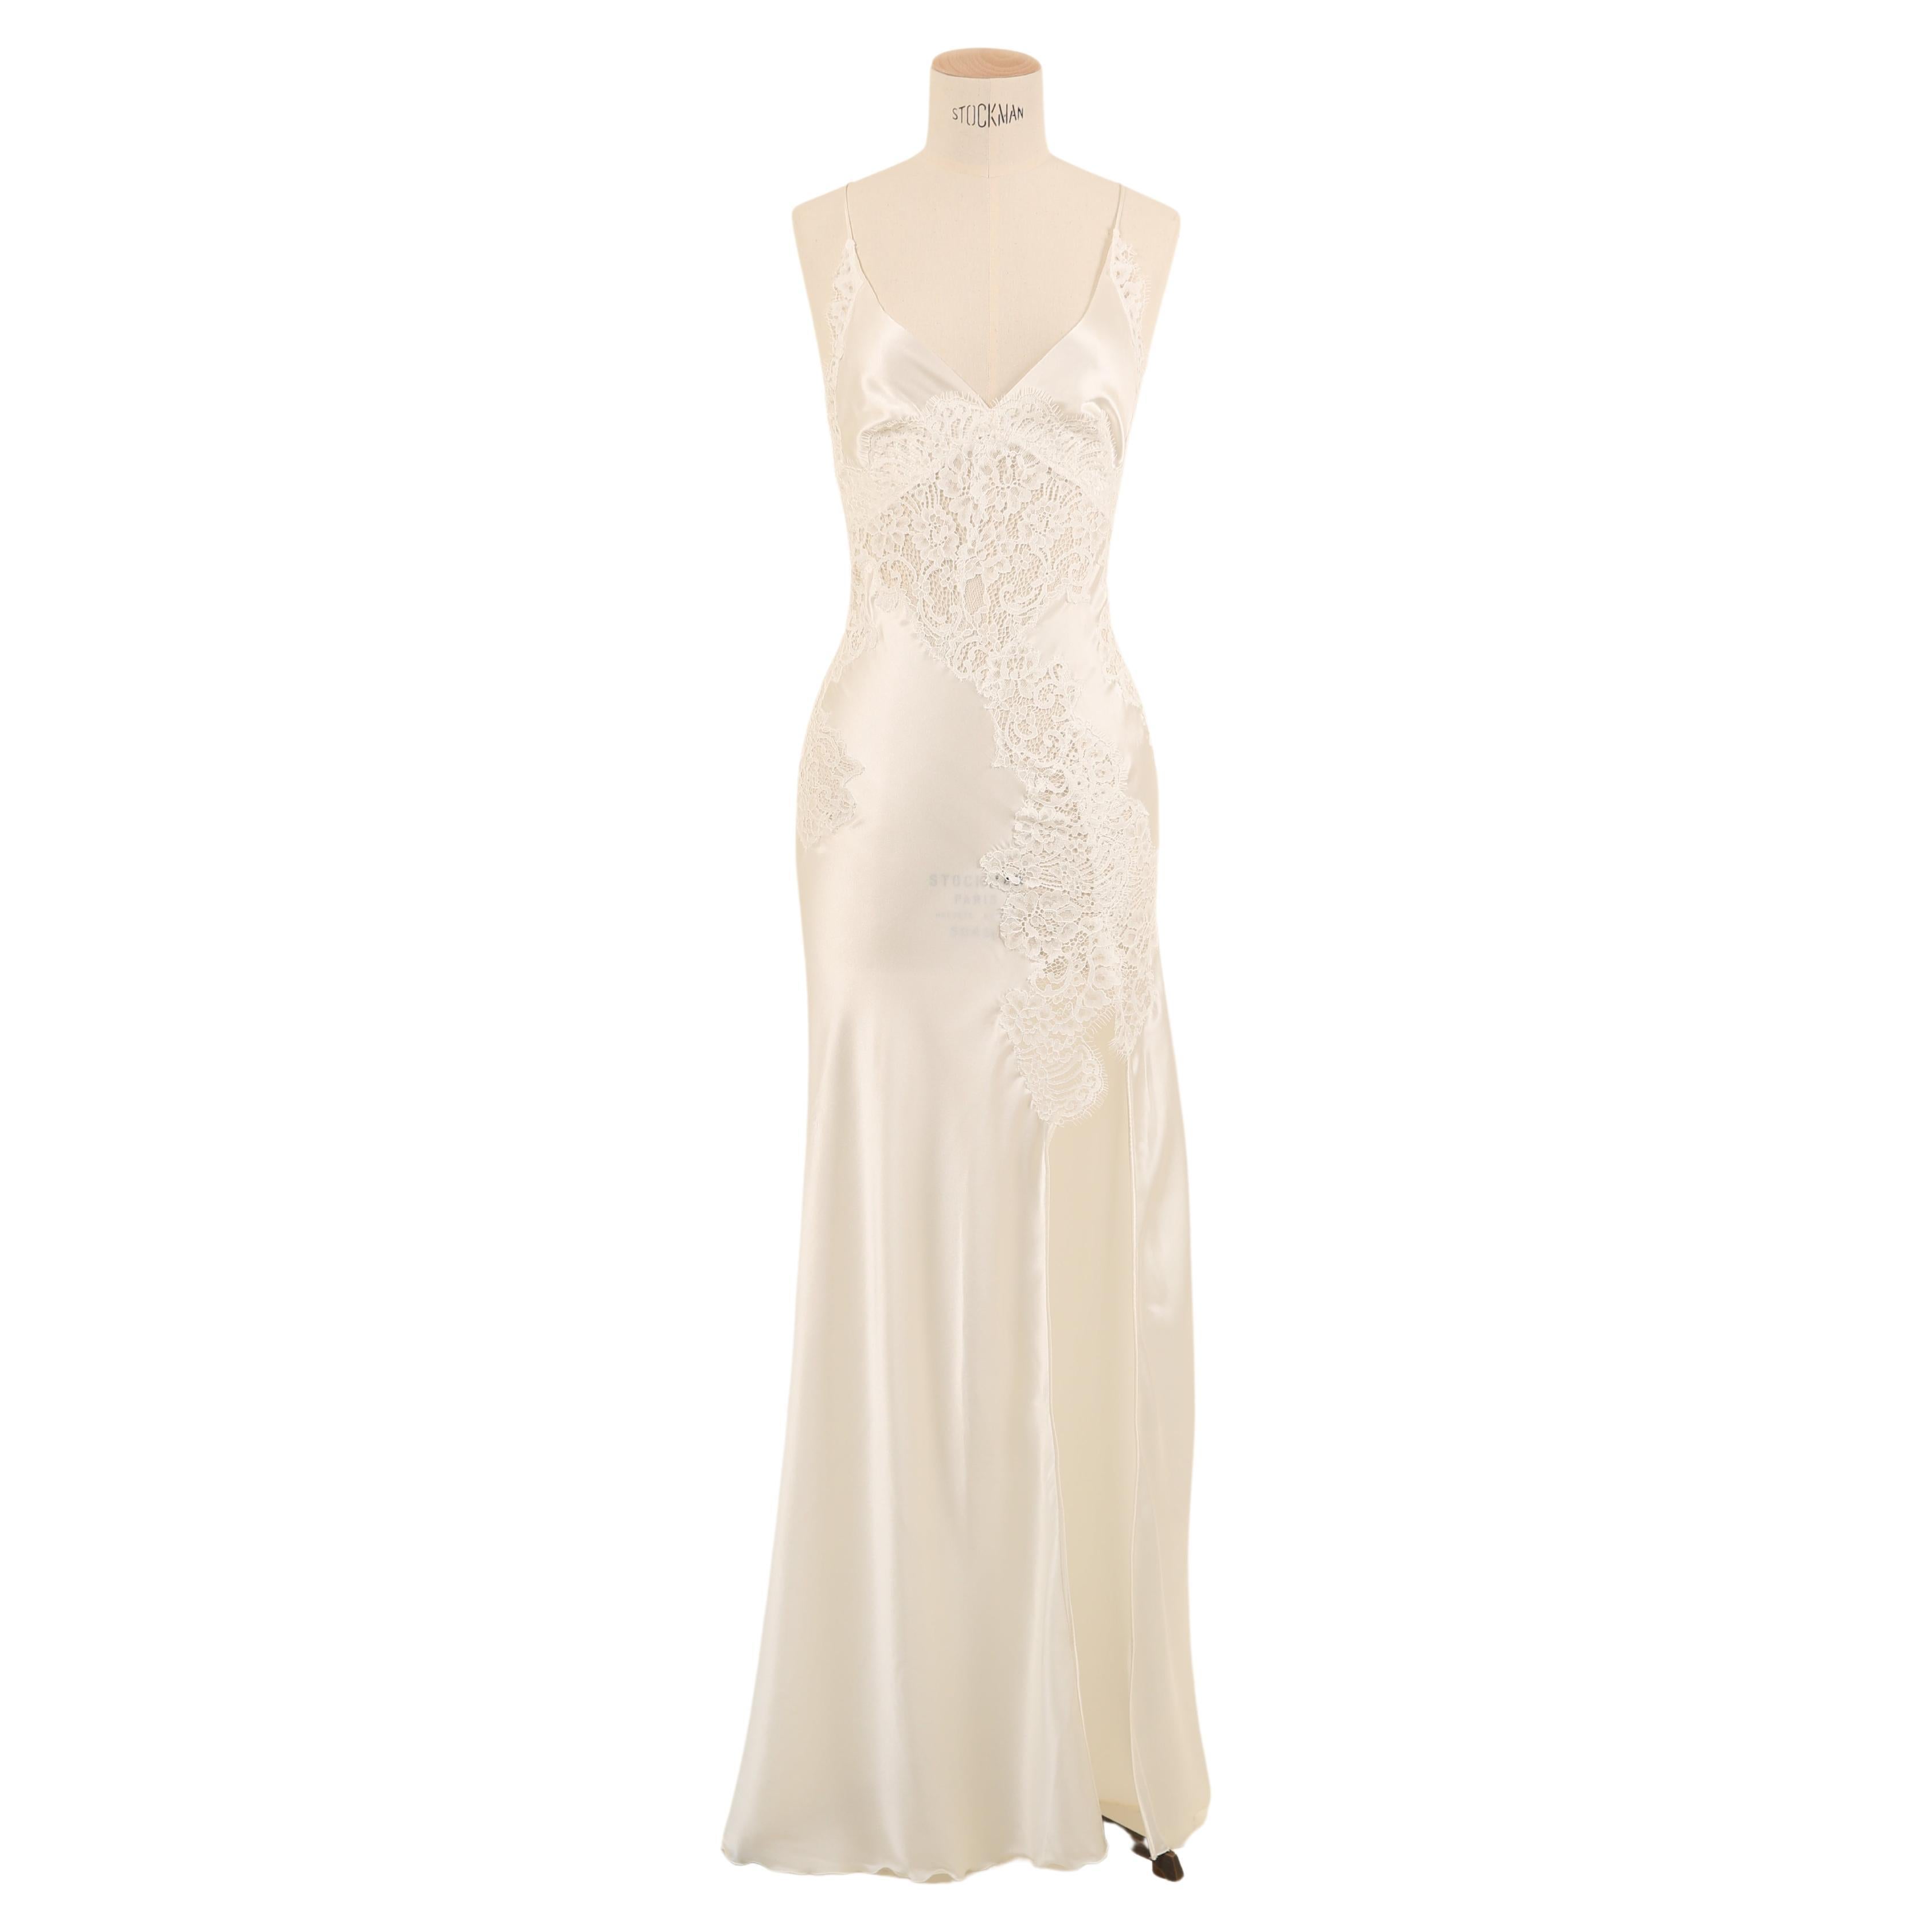 Ermanno Scervino ivory white silk lace plunging slit night gown backless dress For Sale